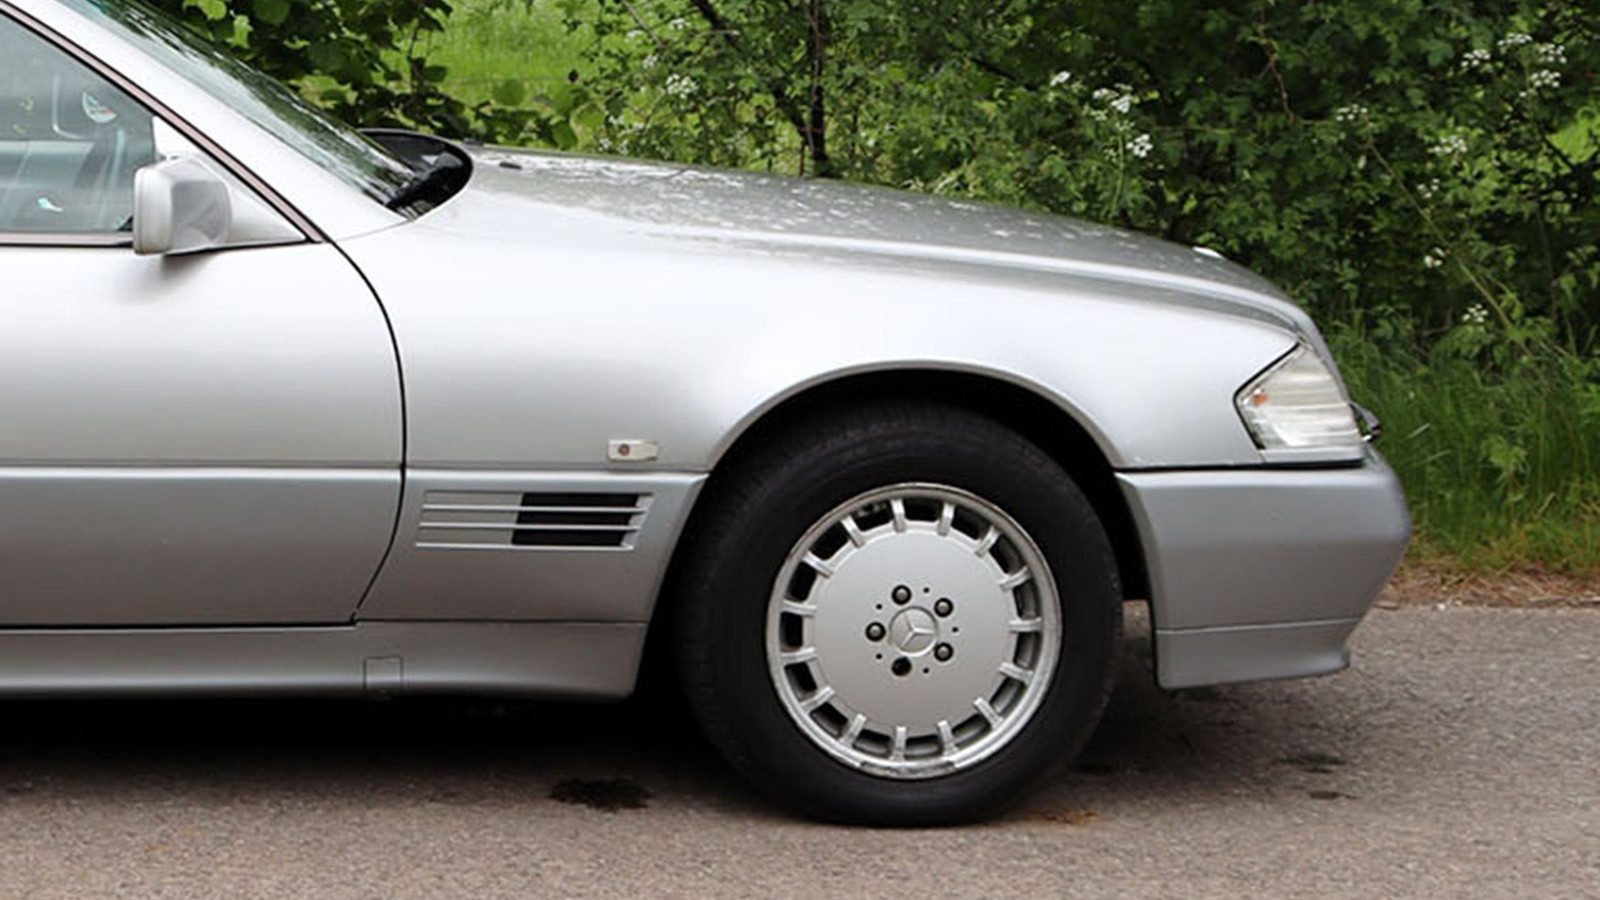 Stirling Moss’ Mercedes-Benz 500SL is for sale